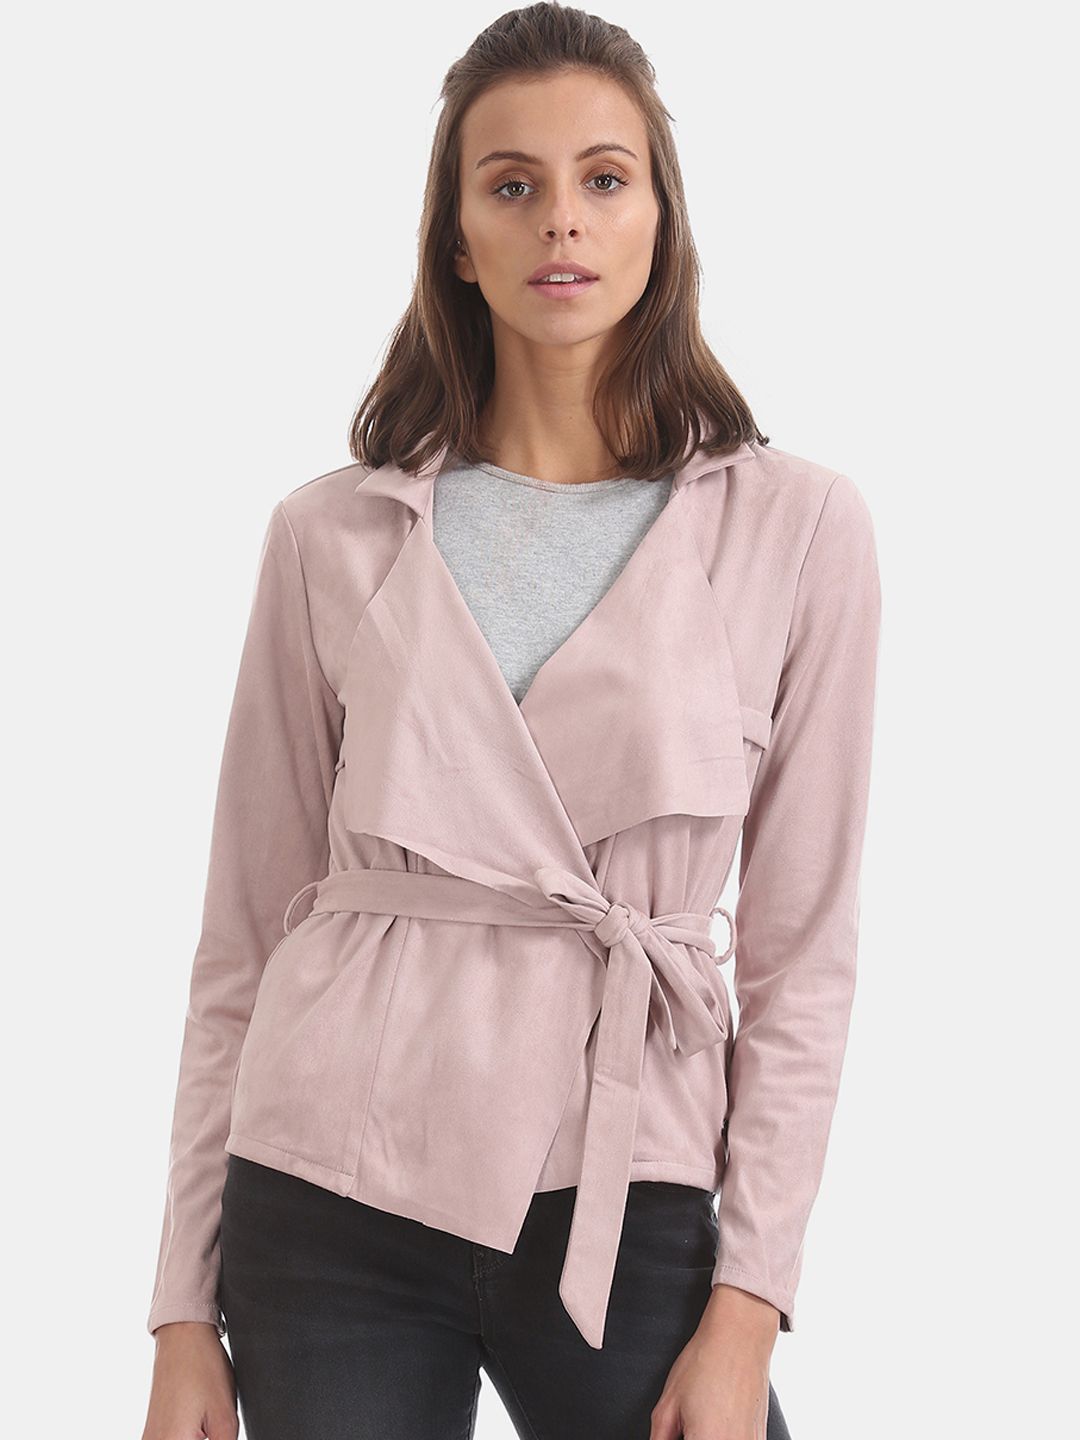 U.S. Polo Assn. Women Pink Solid Open Front Shrug Price in India